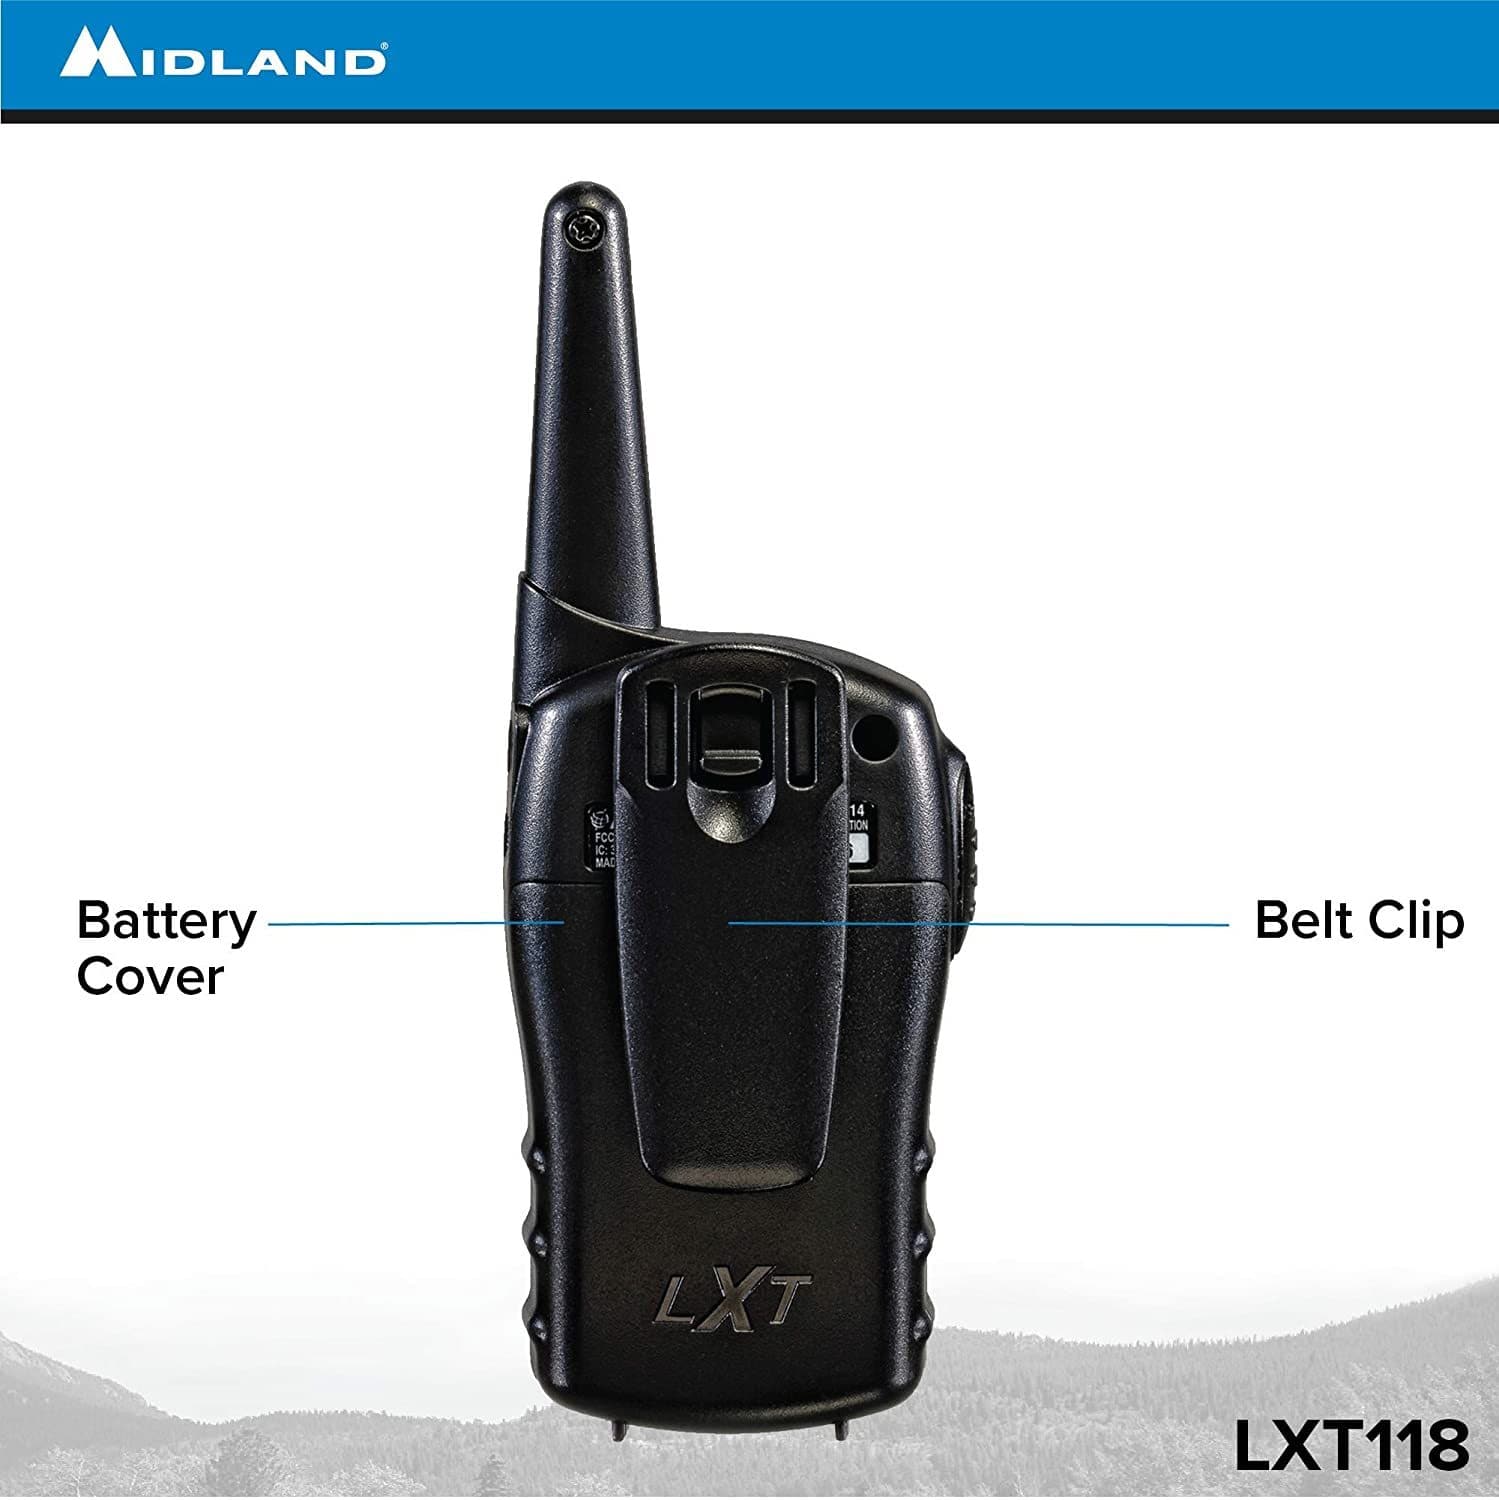 Midland LXT118VP 22-Channel GMRS with 18-Mile Range